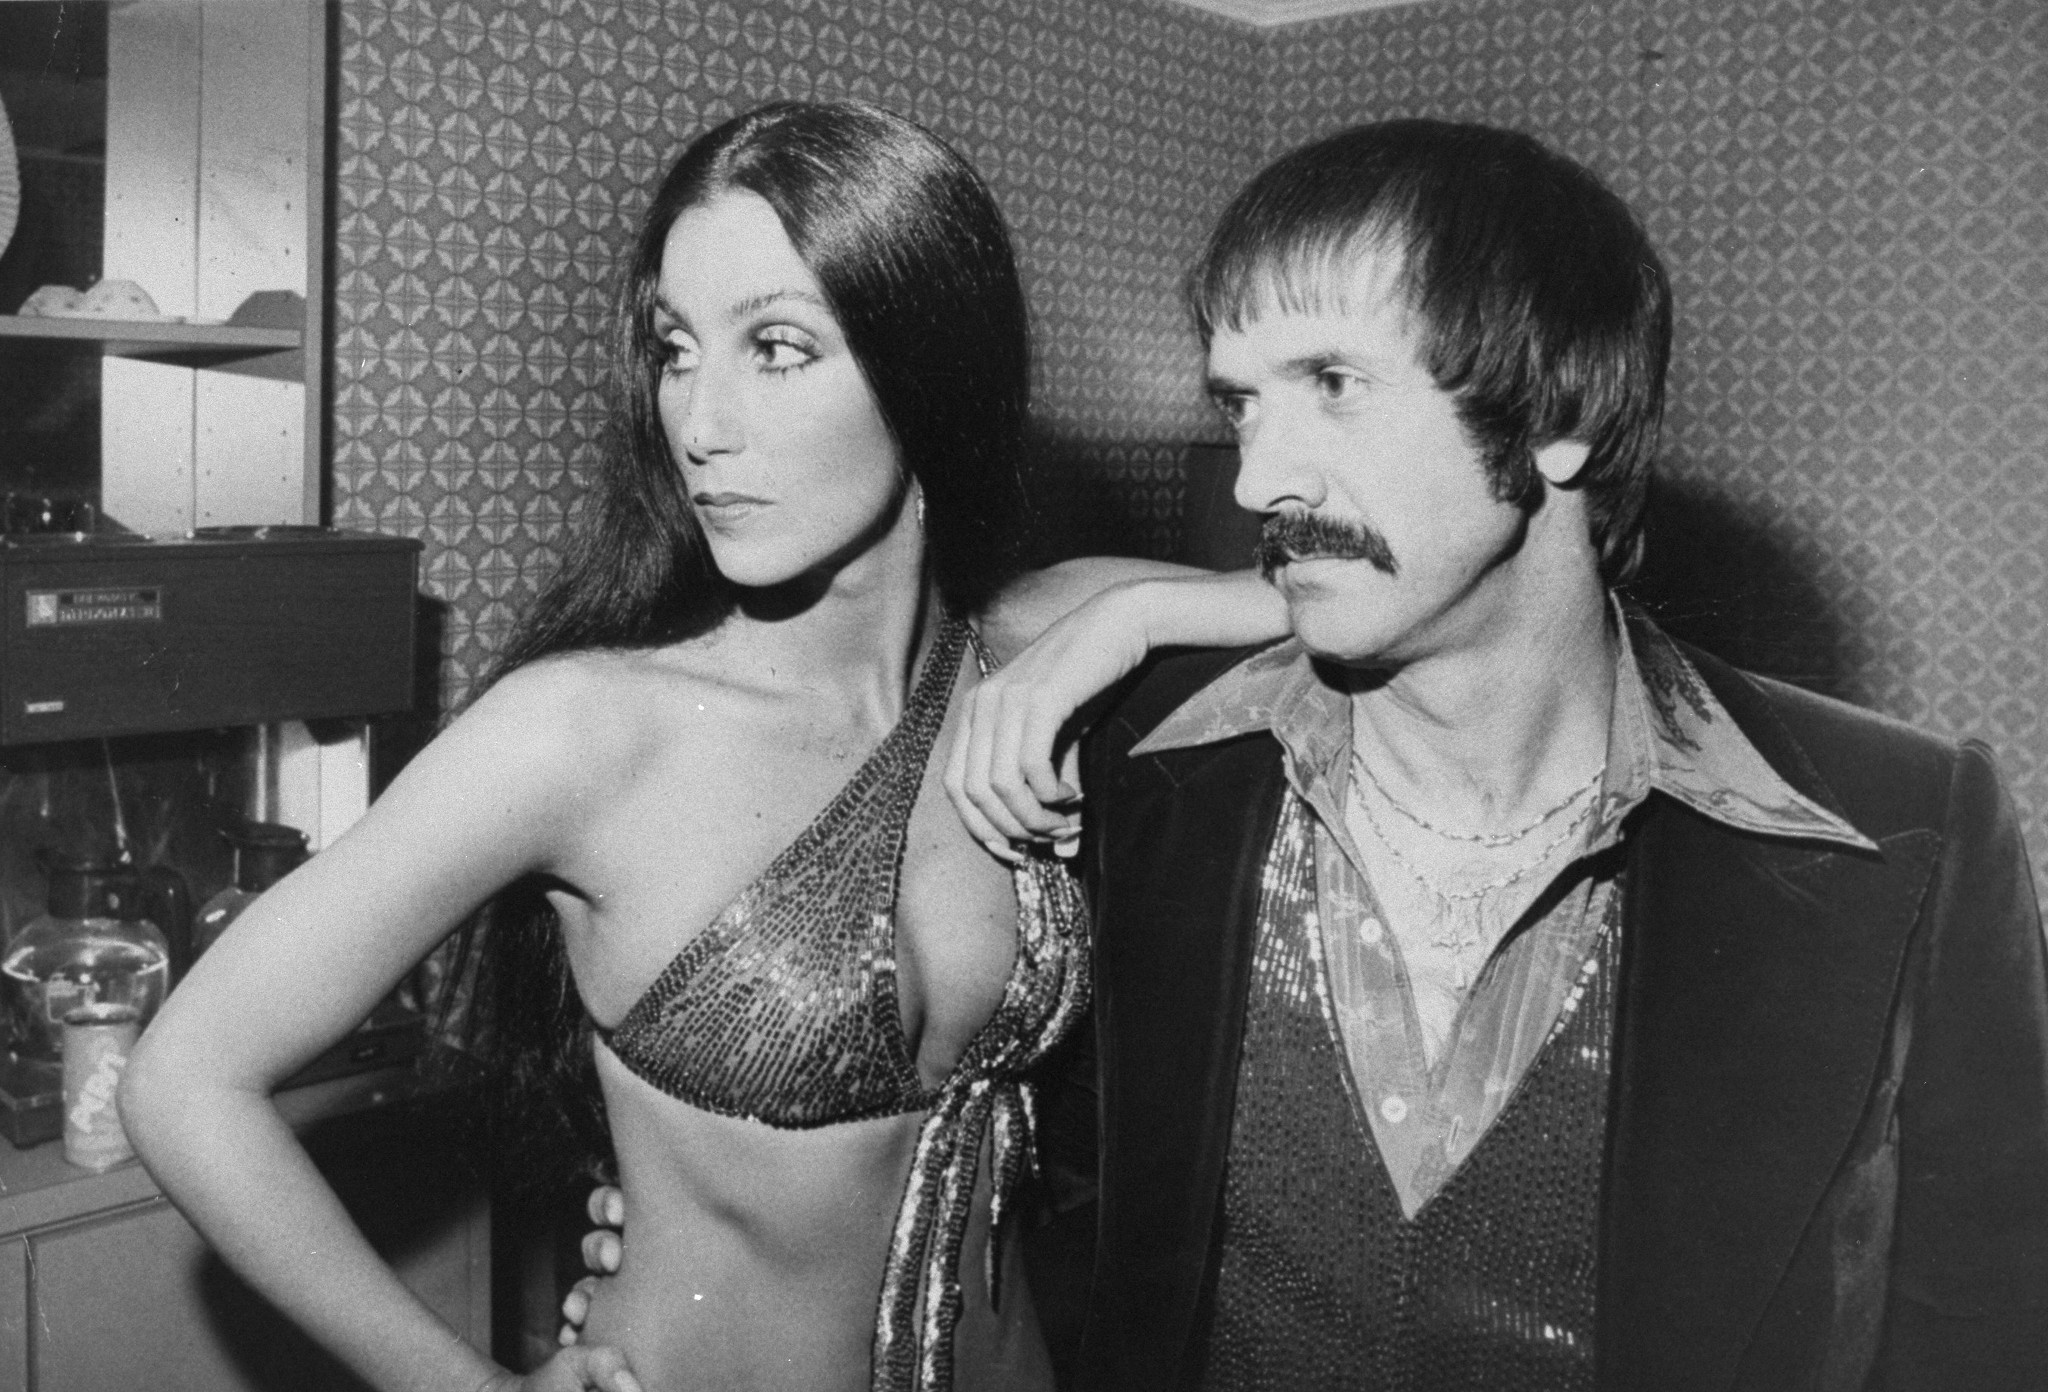 Cher has two children from two previous marriages, including with her music and TV partner Sonny Bono